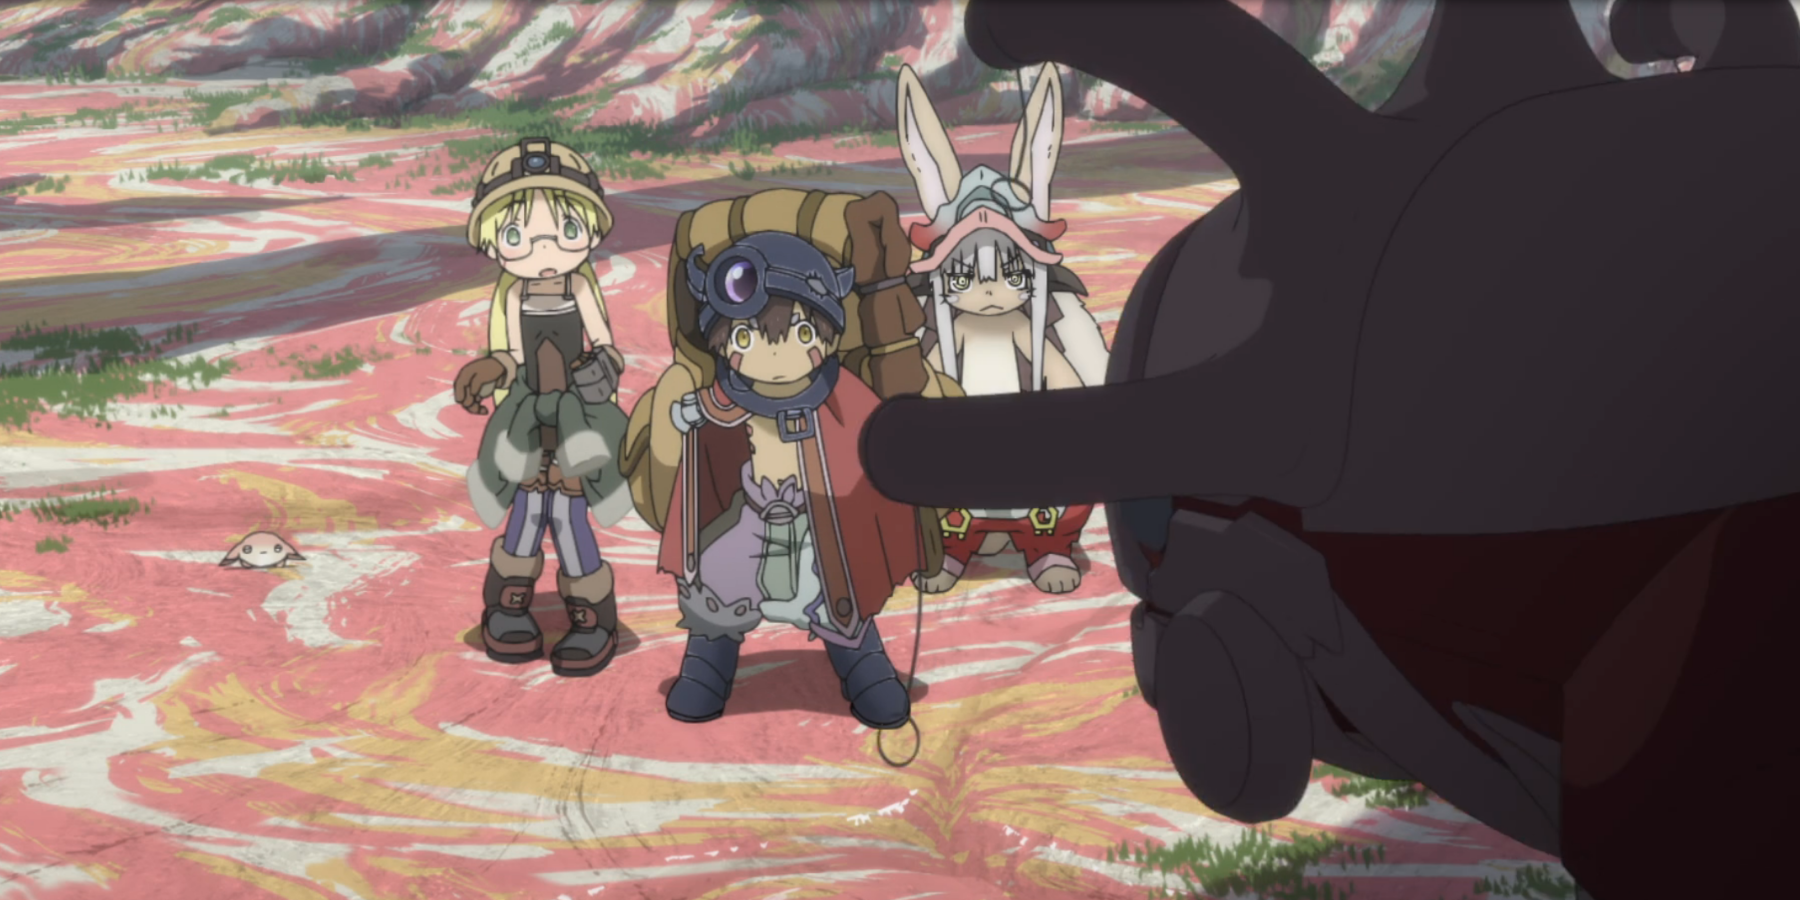 Made in Abyss Season 2 Episode 2